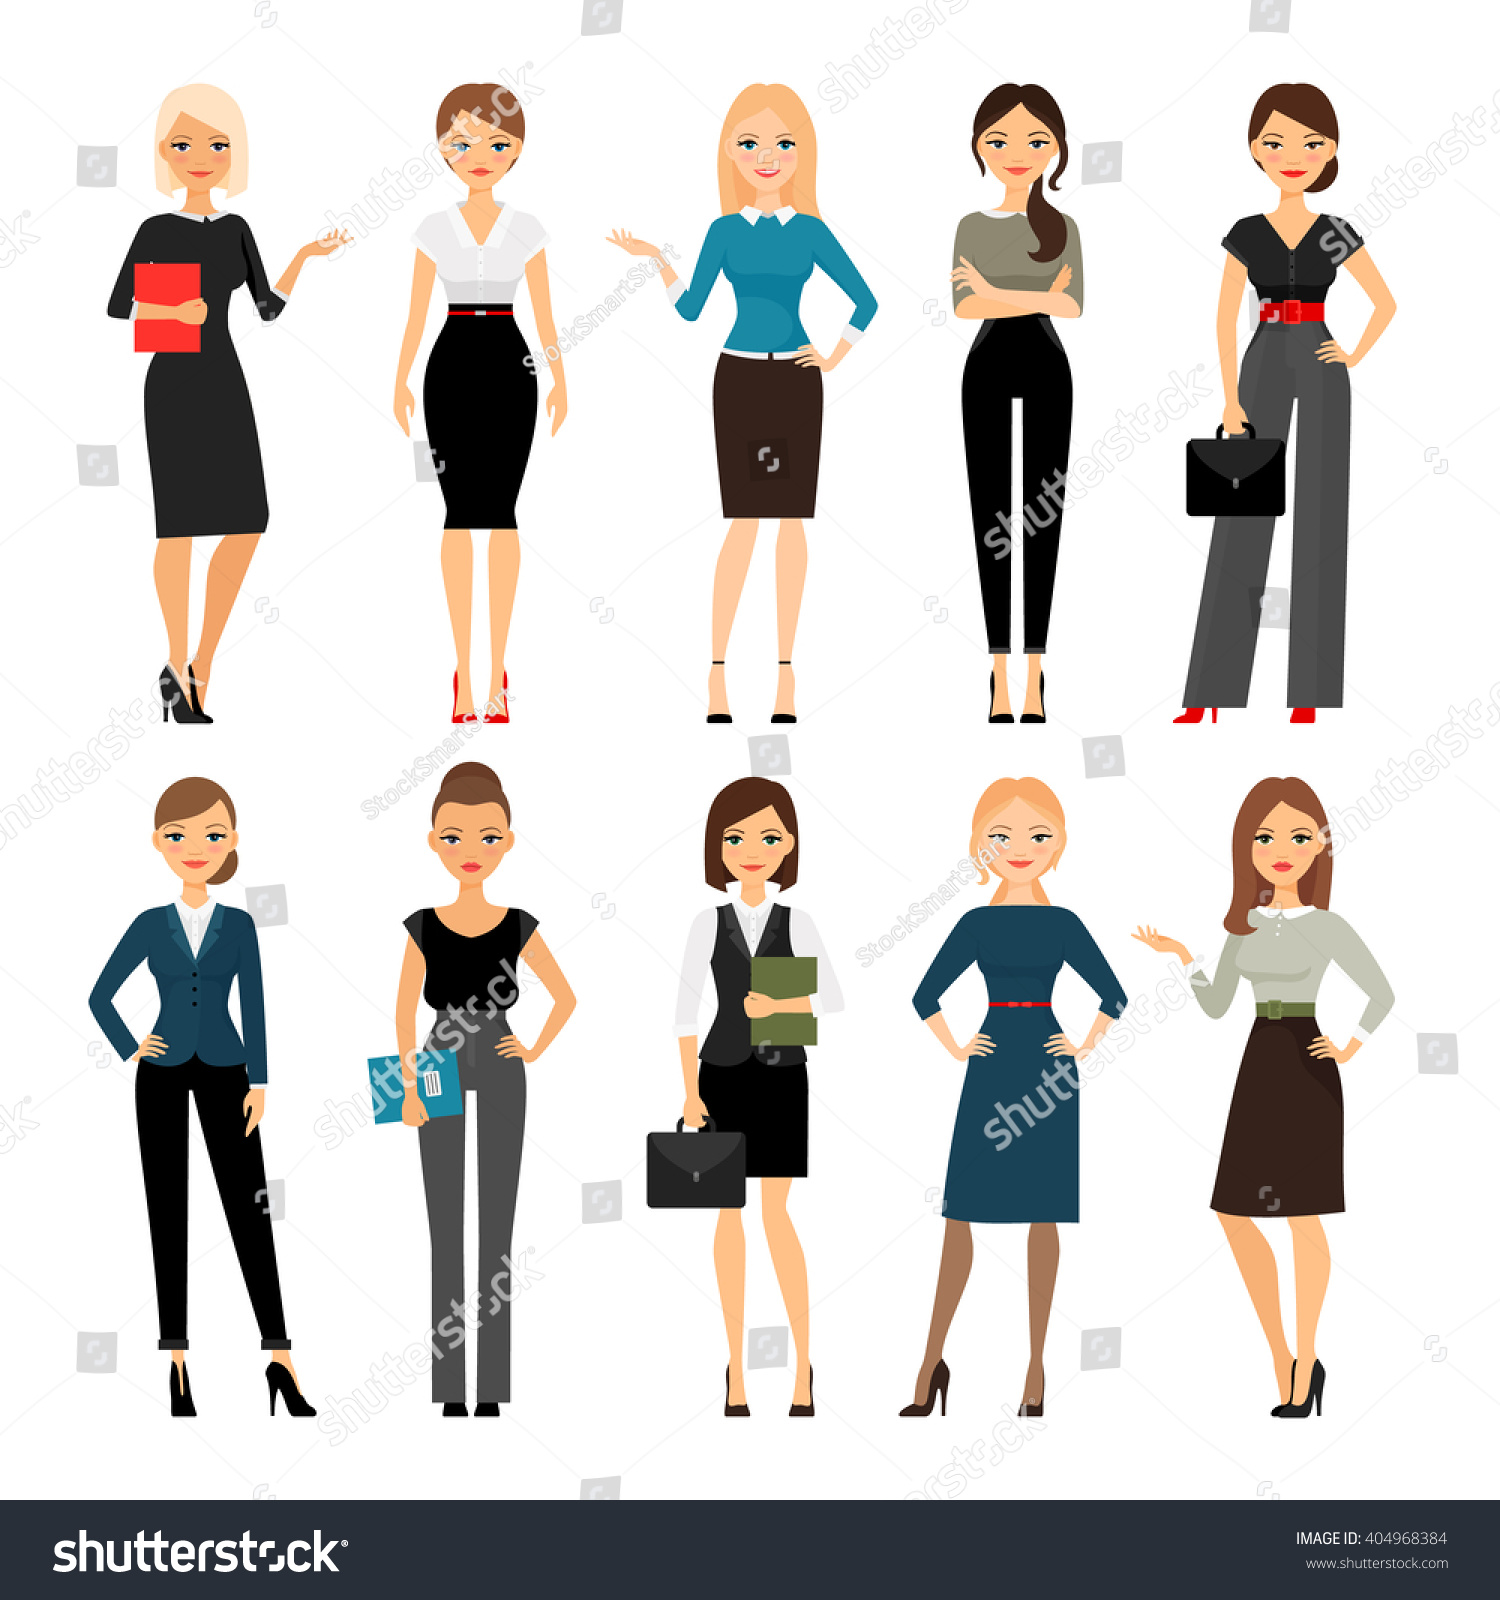 free clip art business casual - photo #29